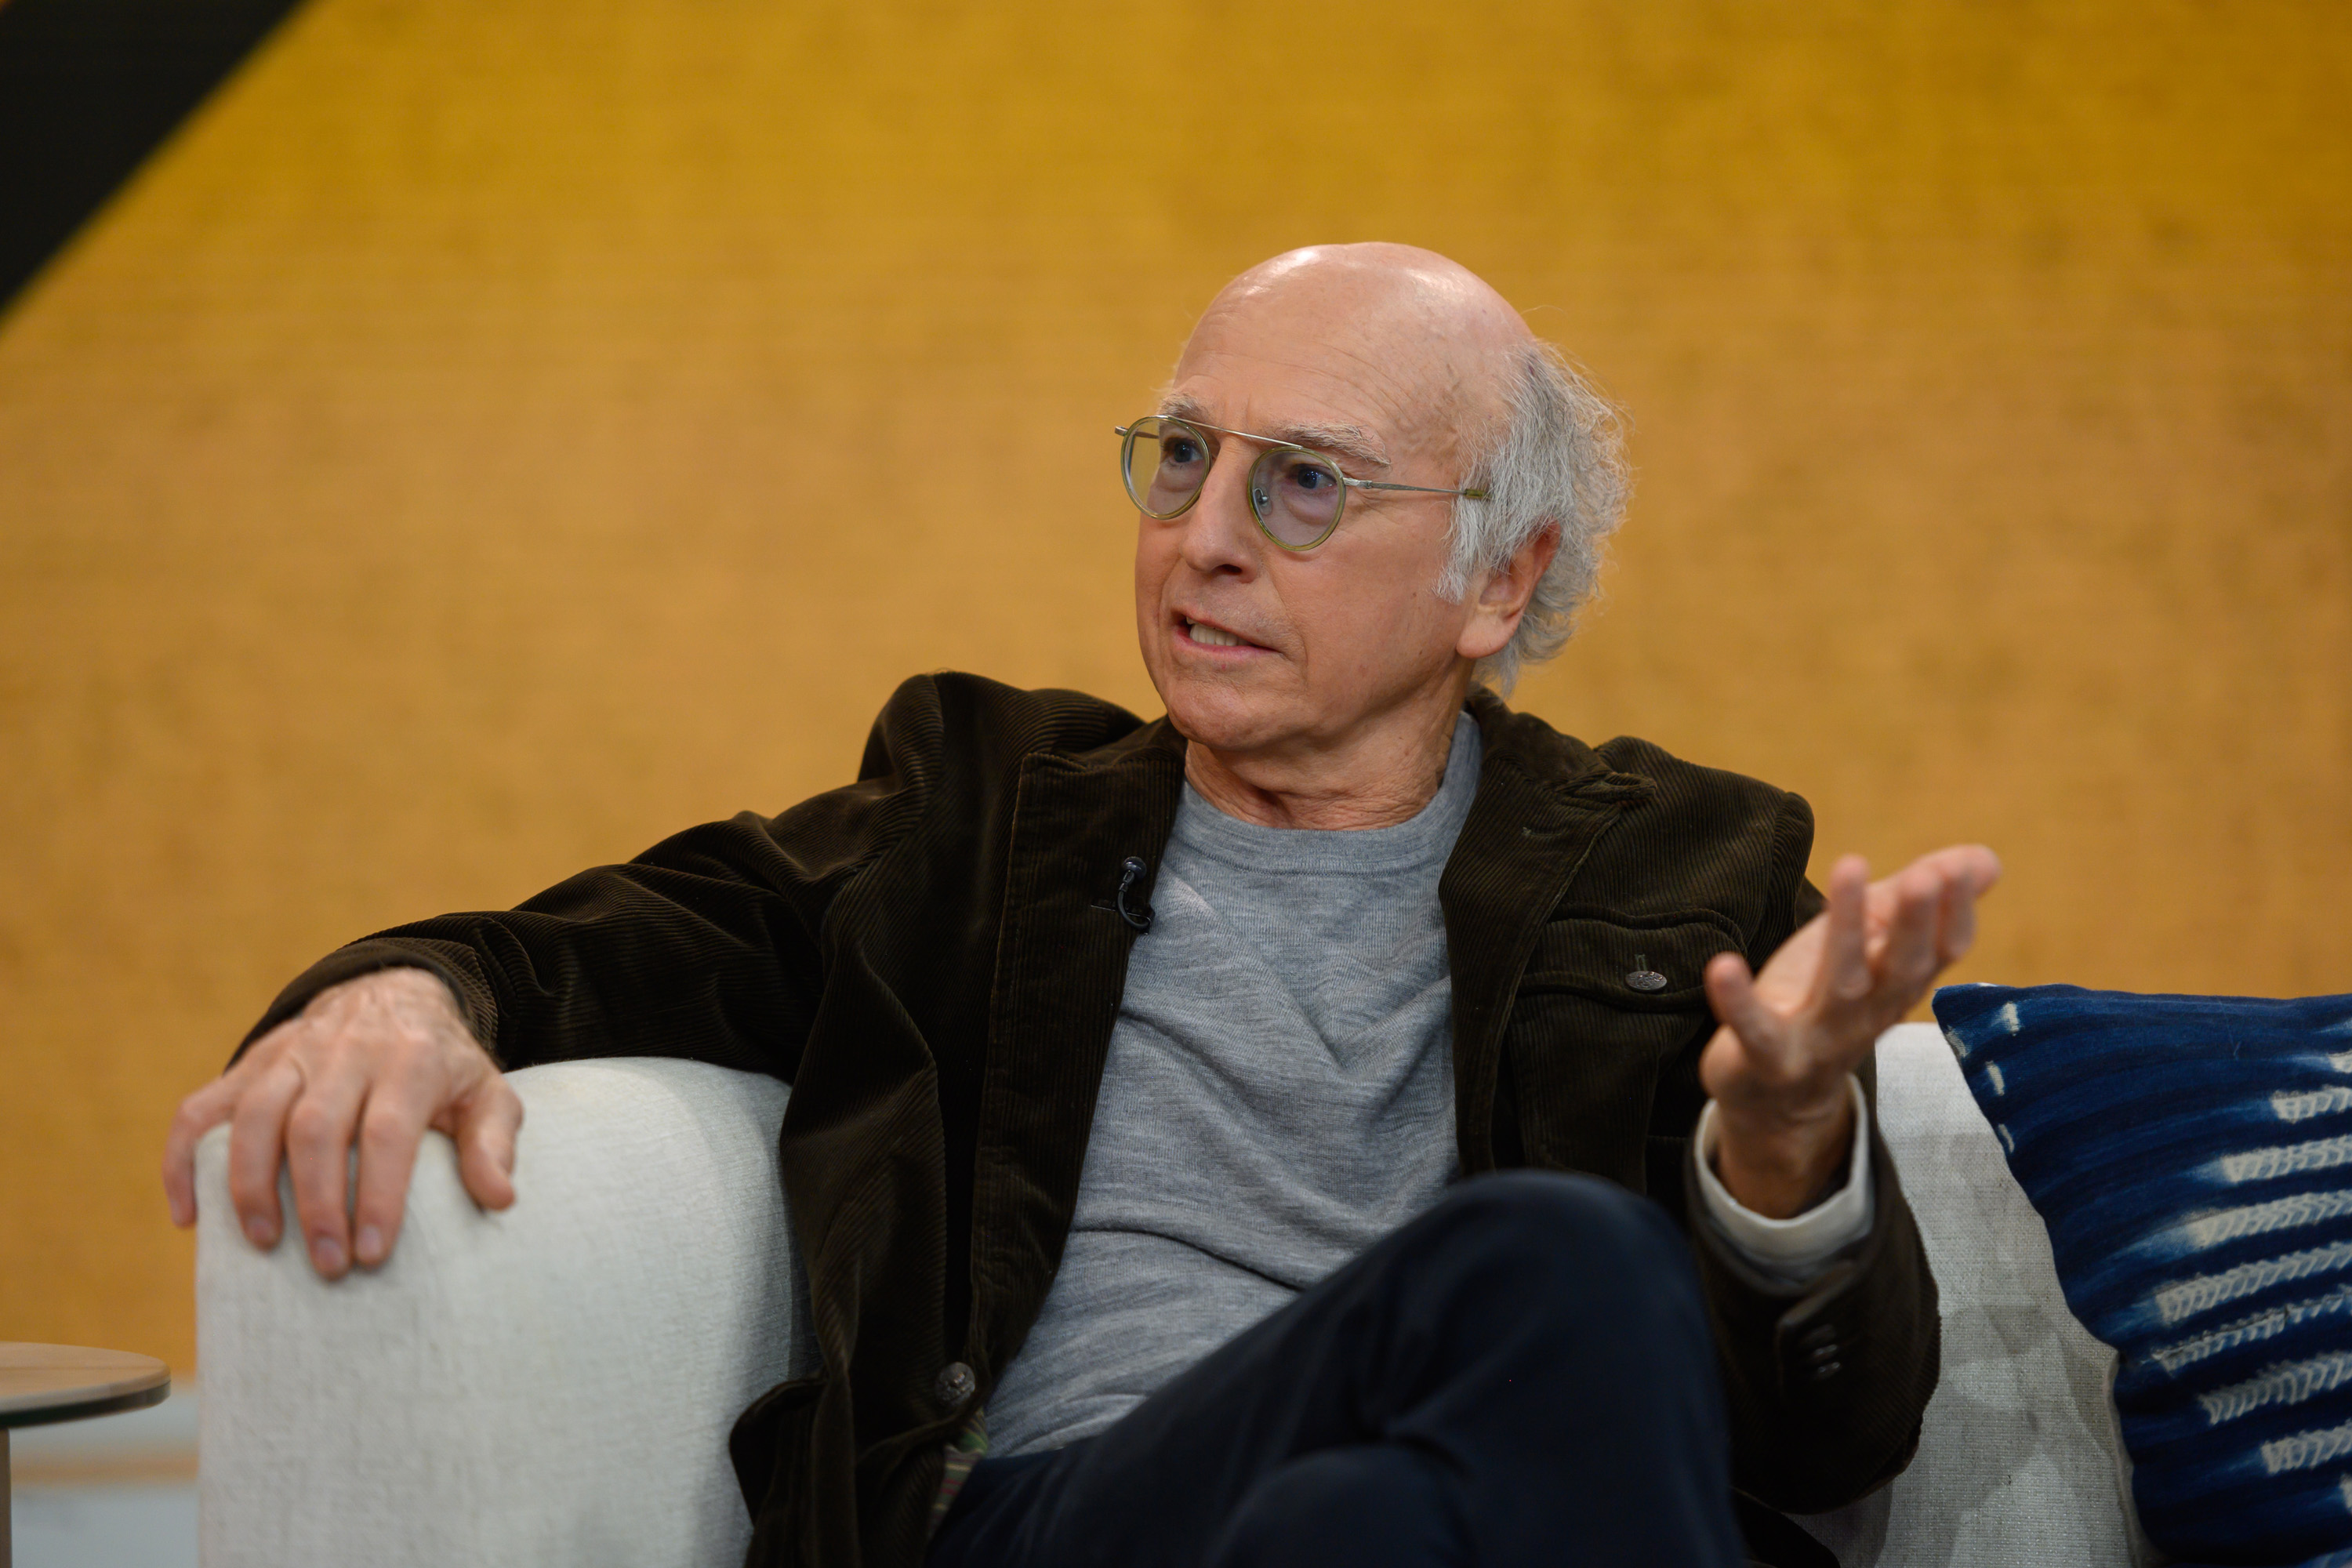 Larry David's ‘Curb Your Enthusiasm' Returning for Season 11 on HBO